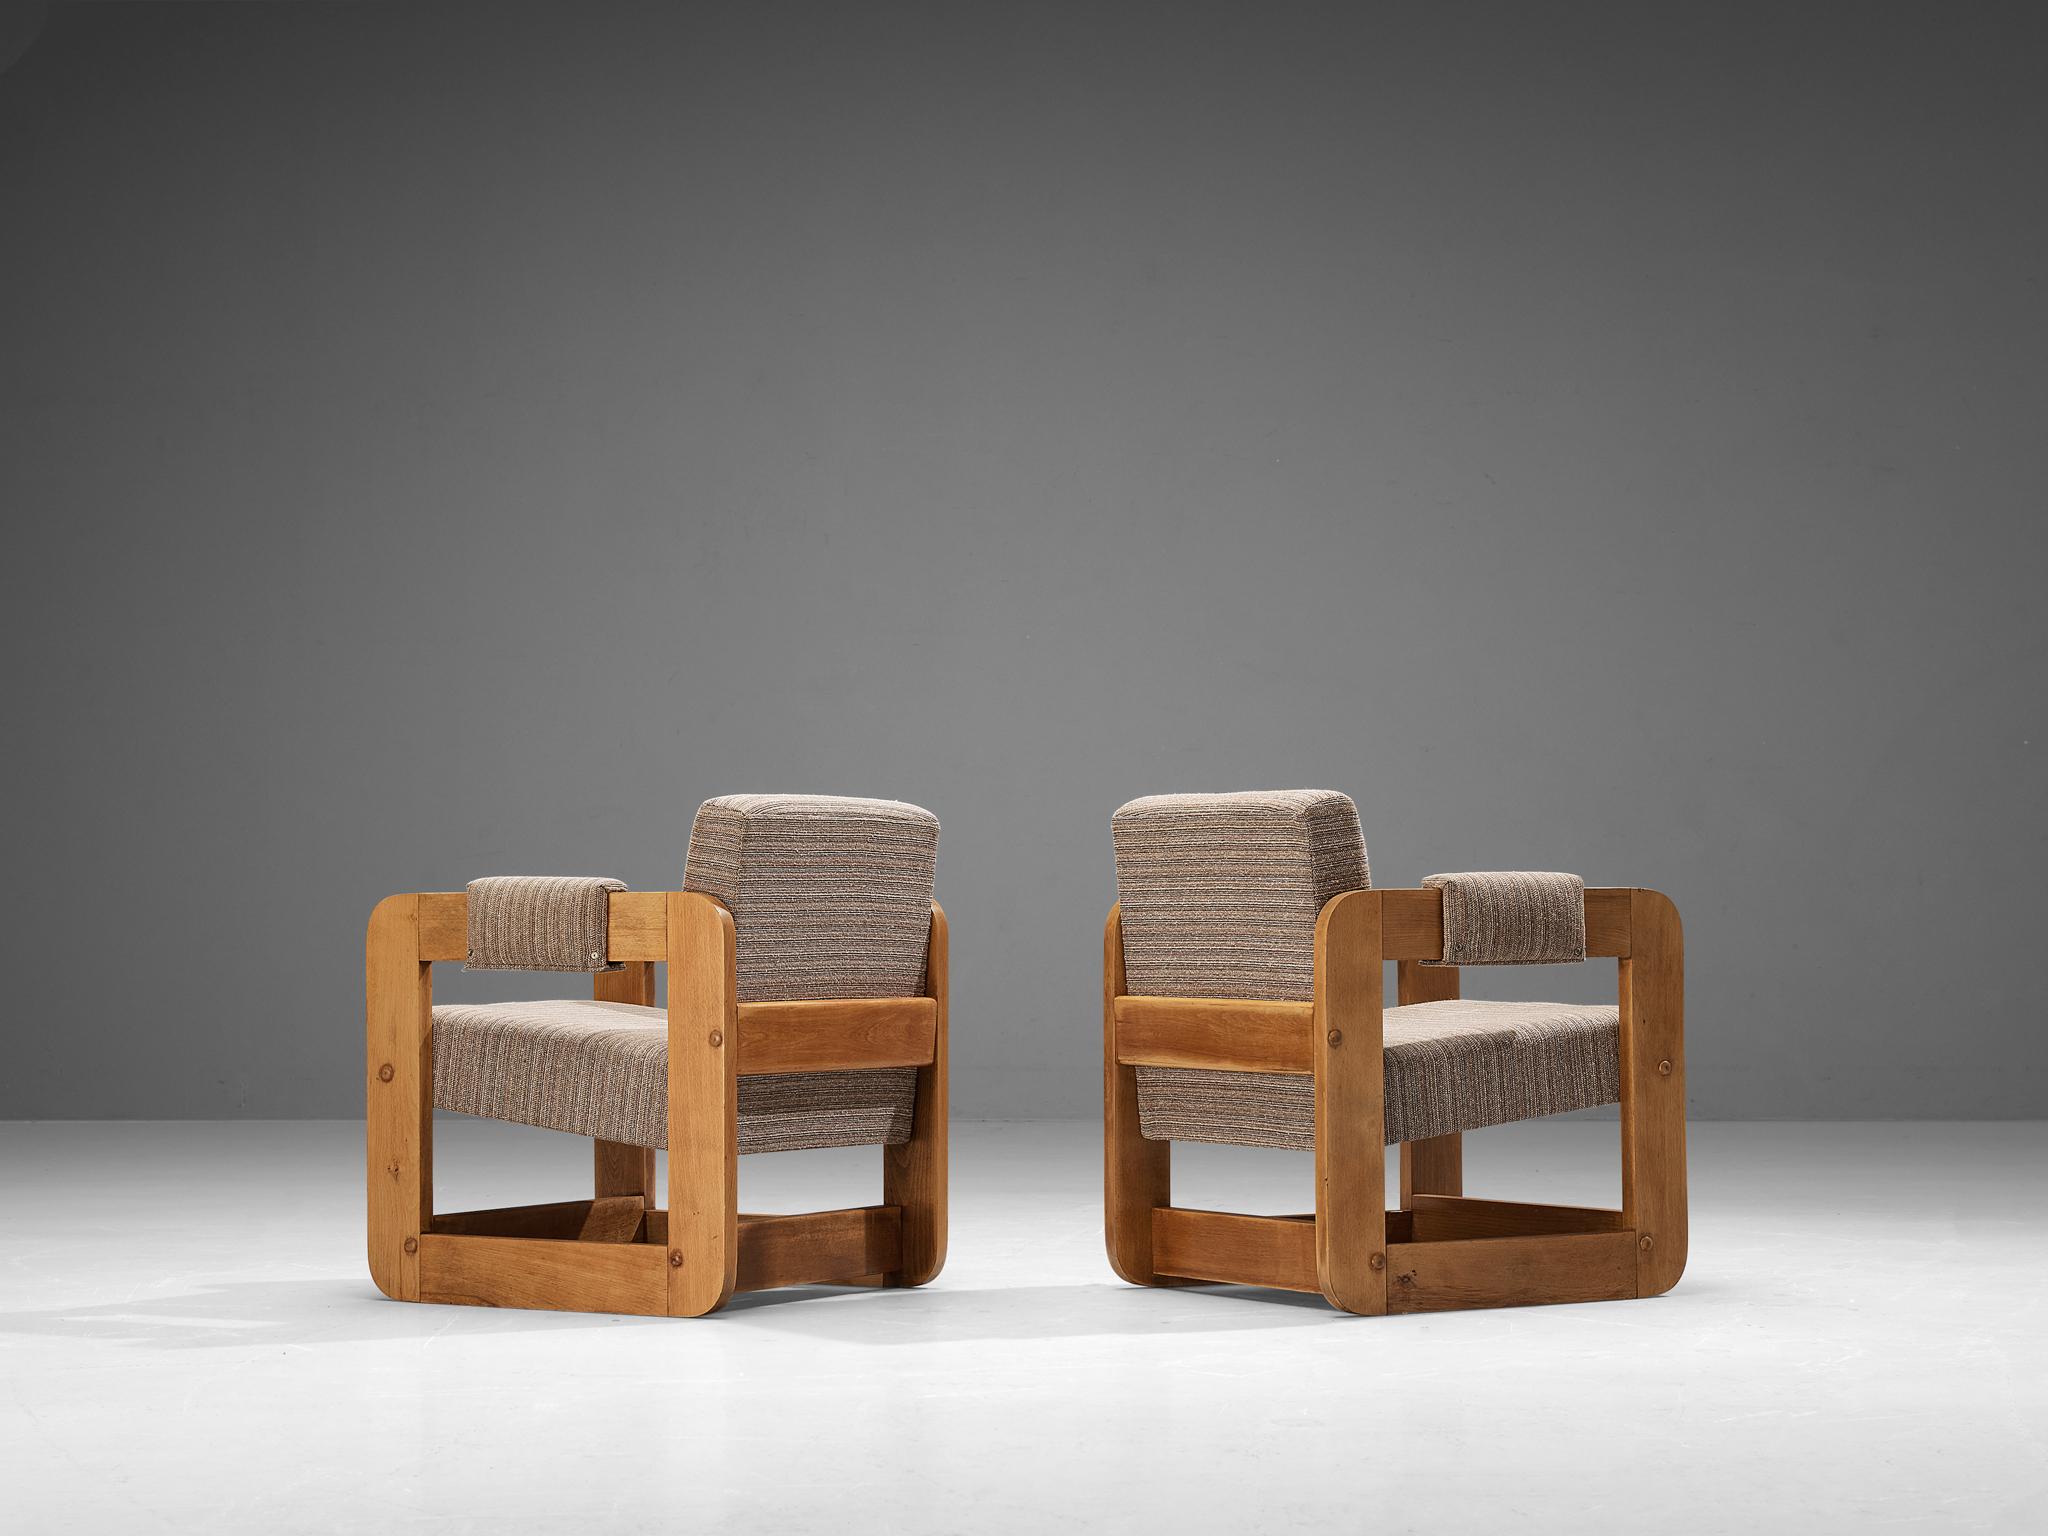 Pair of lounge chairs, beech, fabric, Europe, 1970s. 

Geometric shaped lounge chairs composed of solely cubic forms. The wooden frames that function as armrests are based on a square shape, which gives the unit an open and transparent appeal to